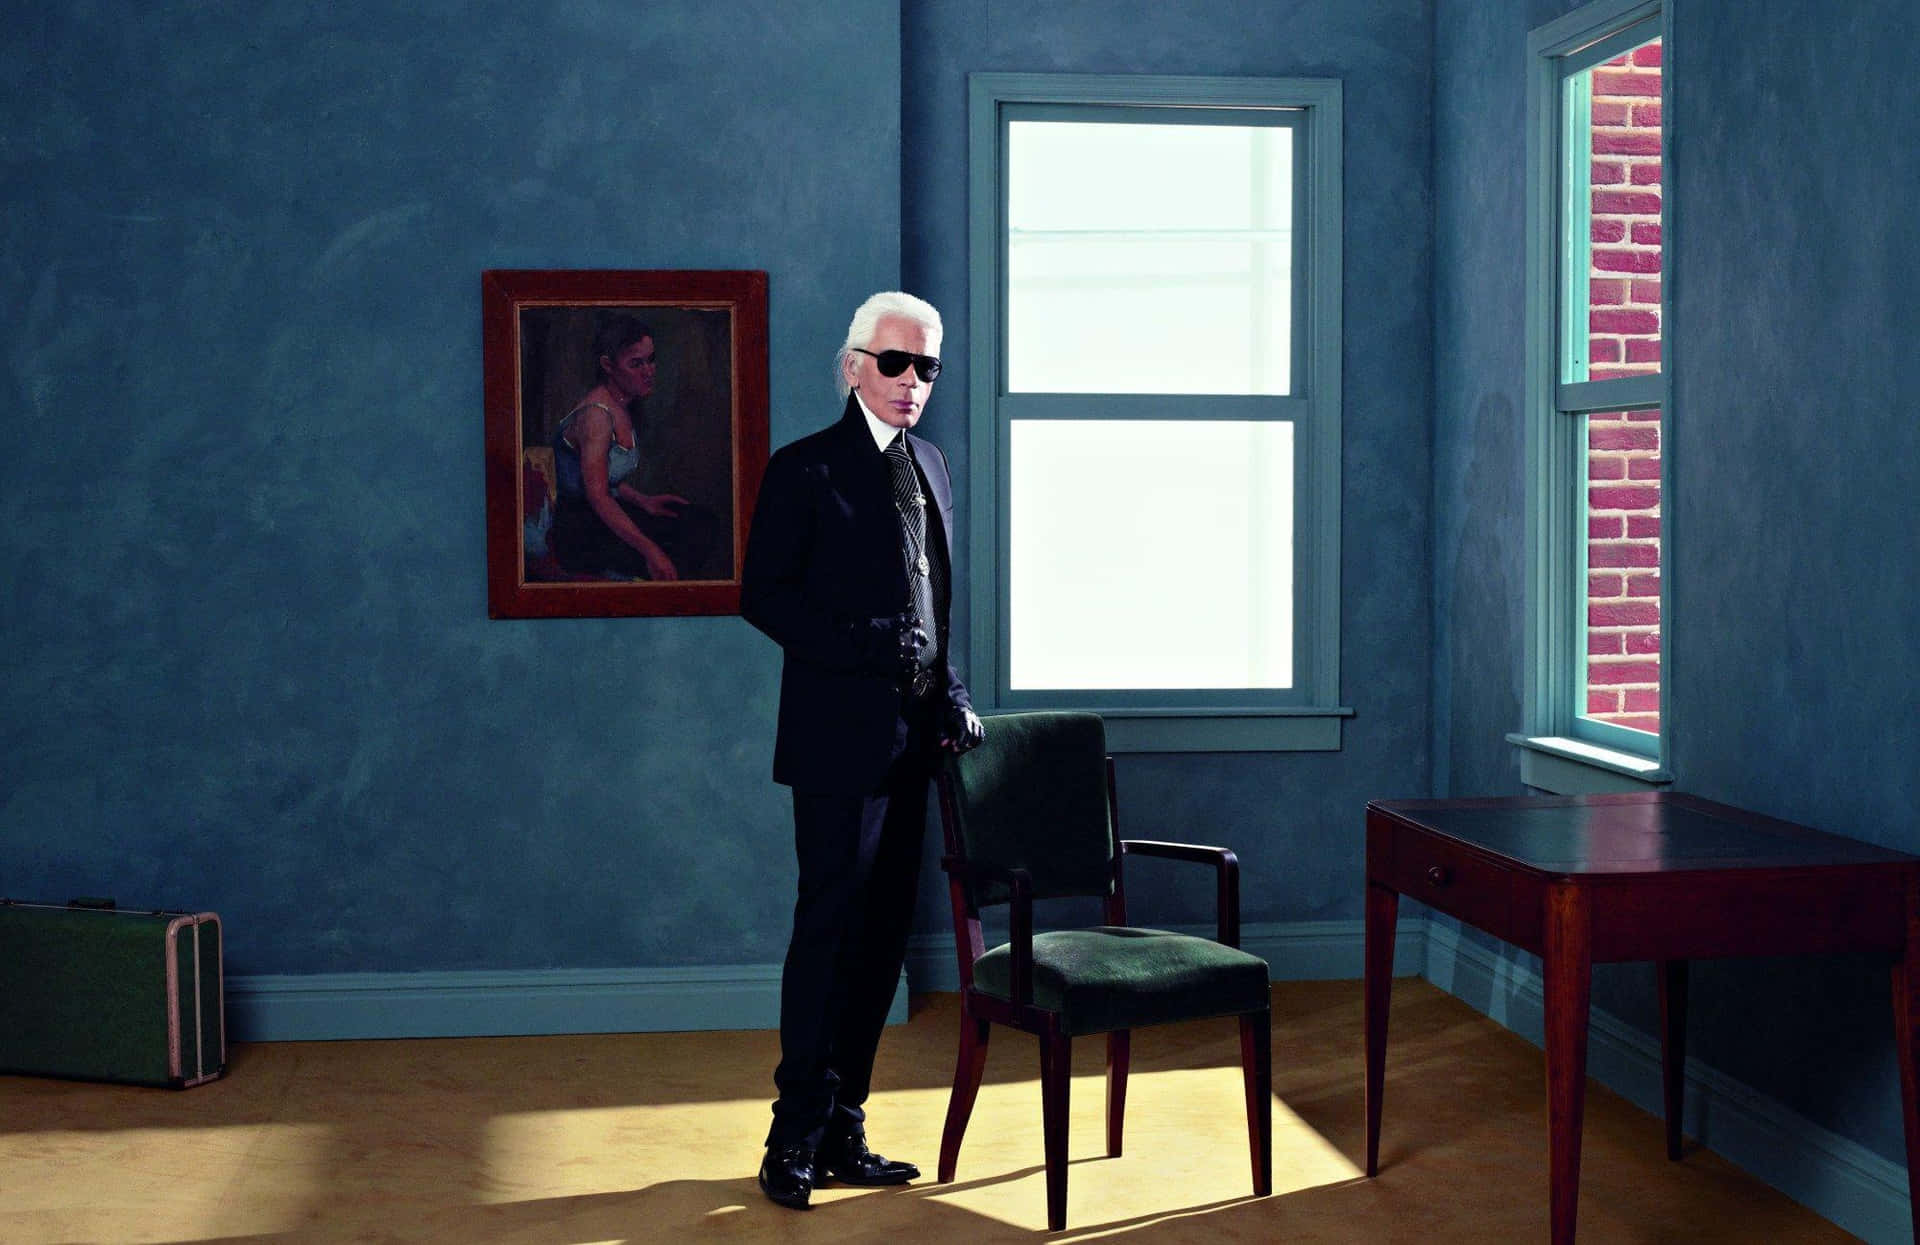 Karl Lagerfeld, Creative Director at Chanel. Wallpaper